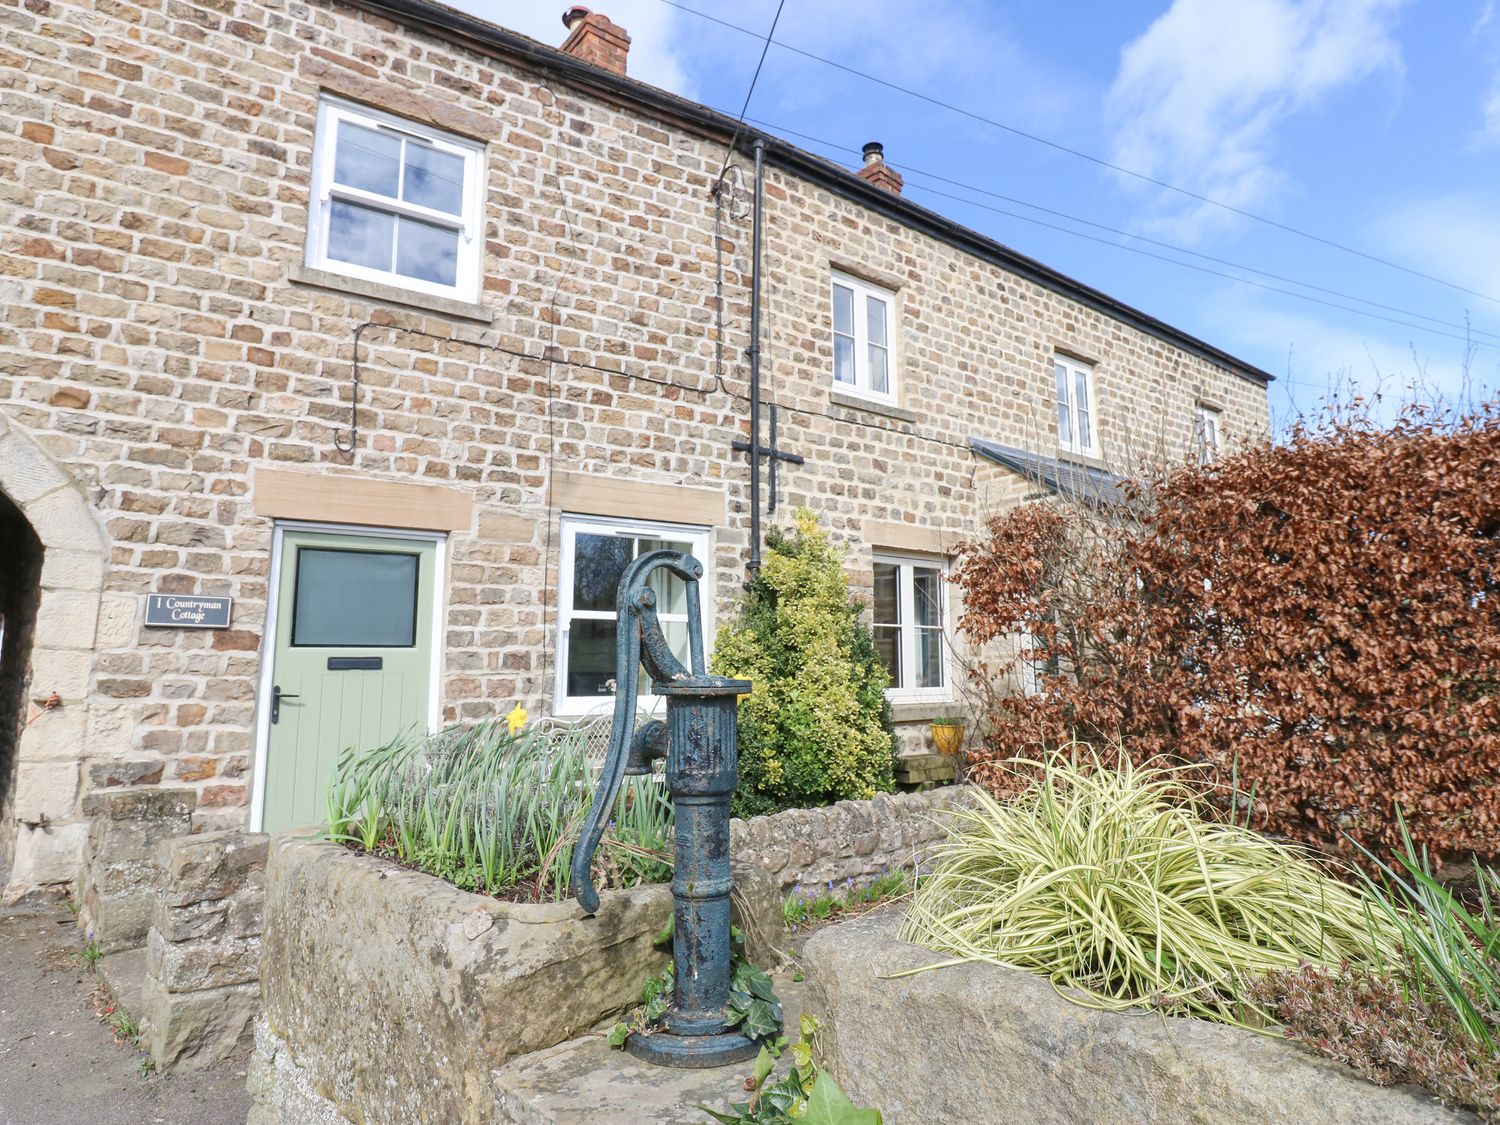 1 Countryman Inn Cottages - Yorkshire Dales - 933188 - photo 1